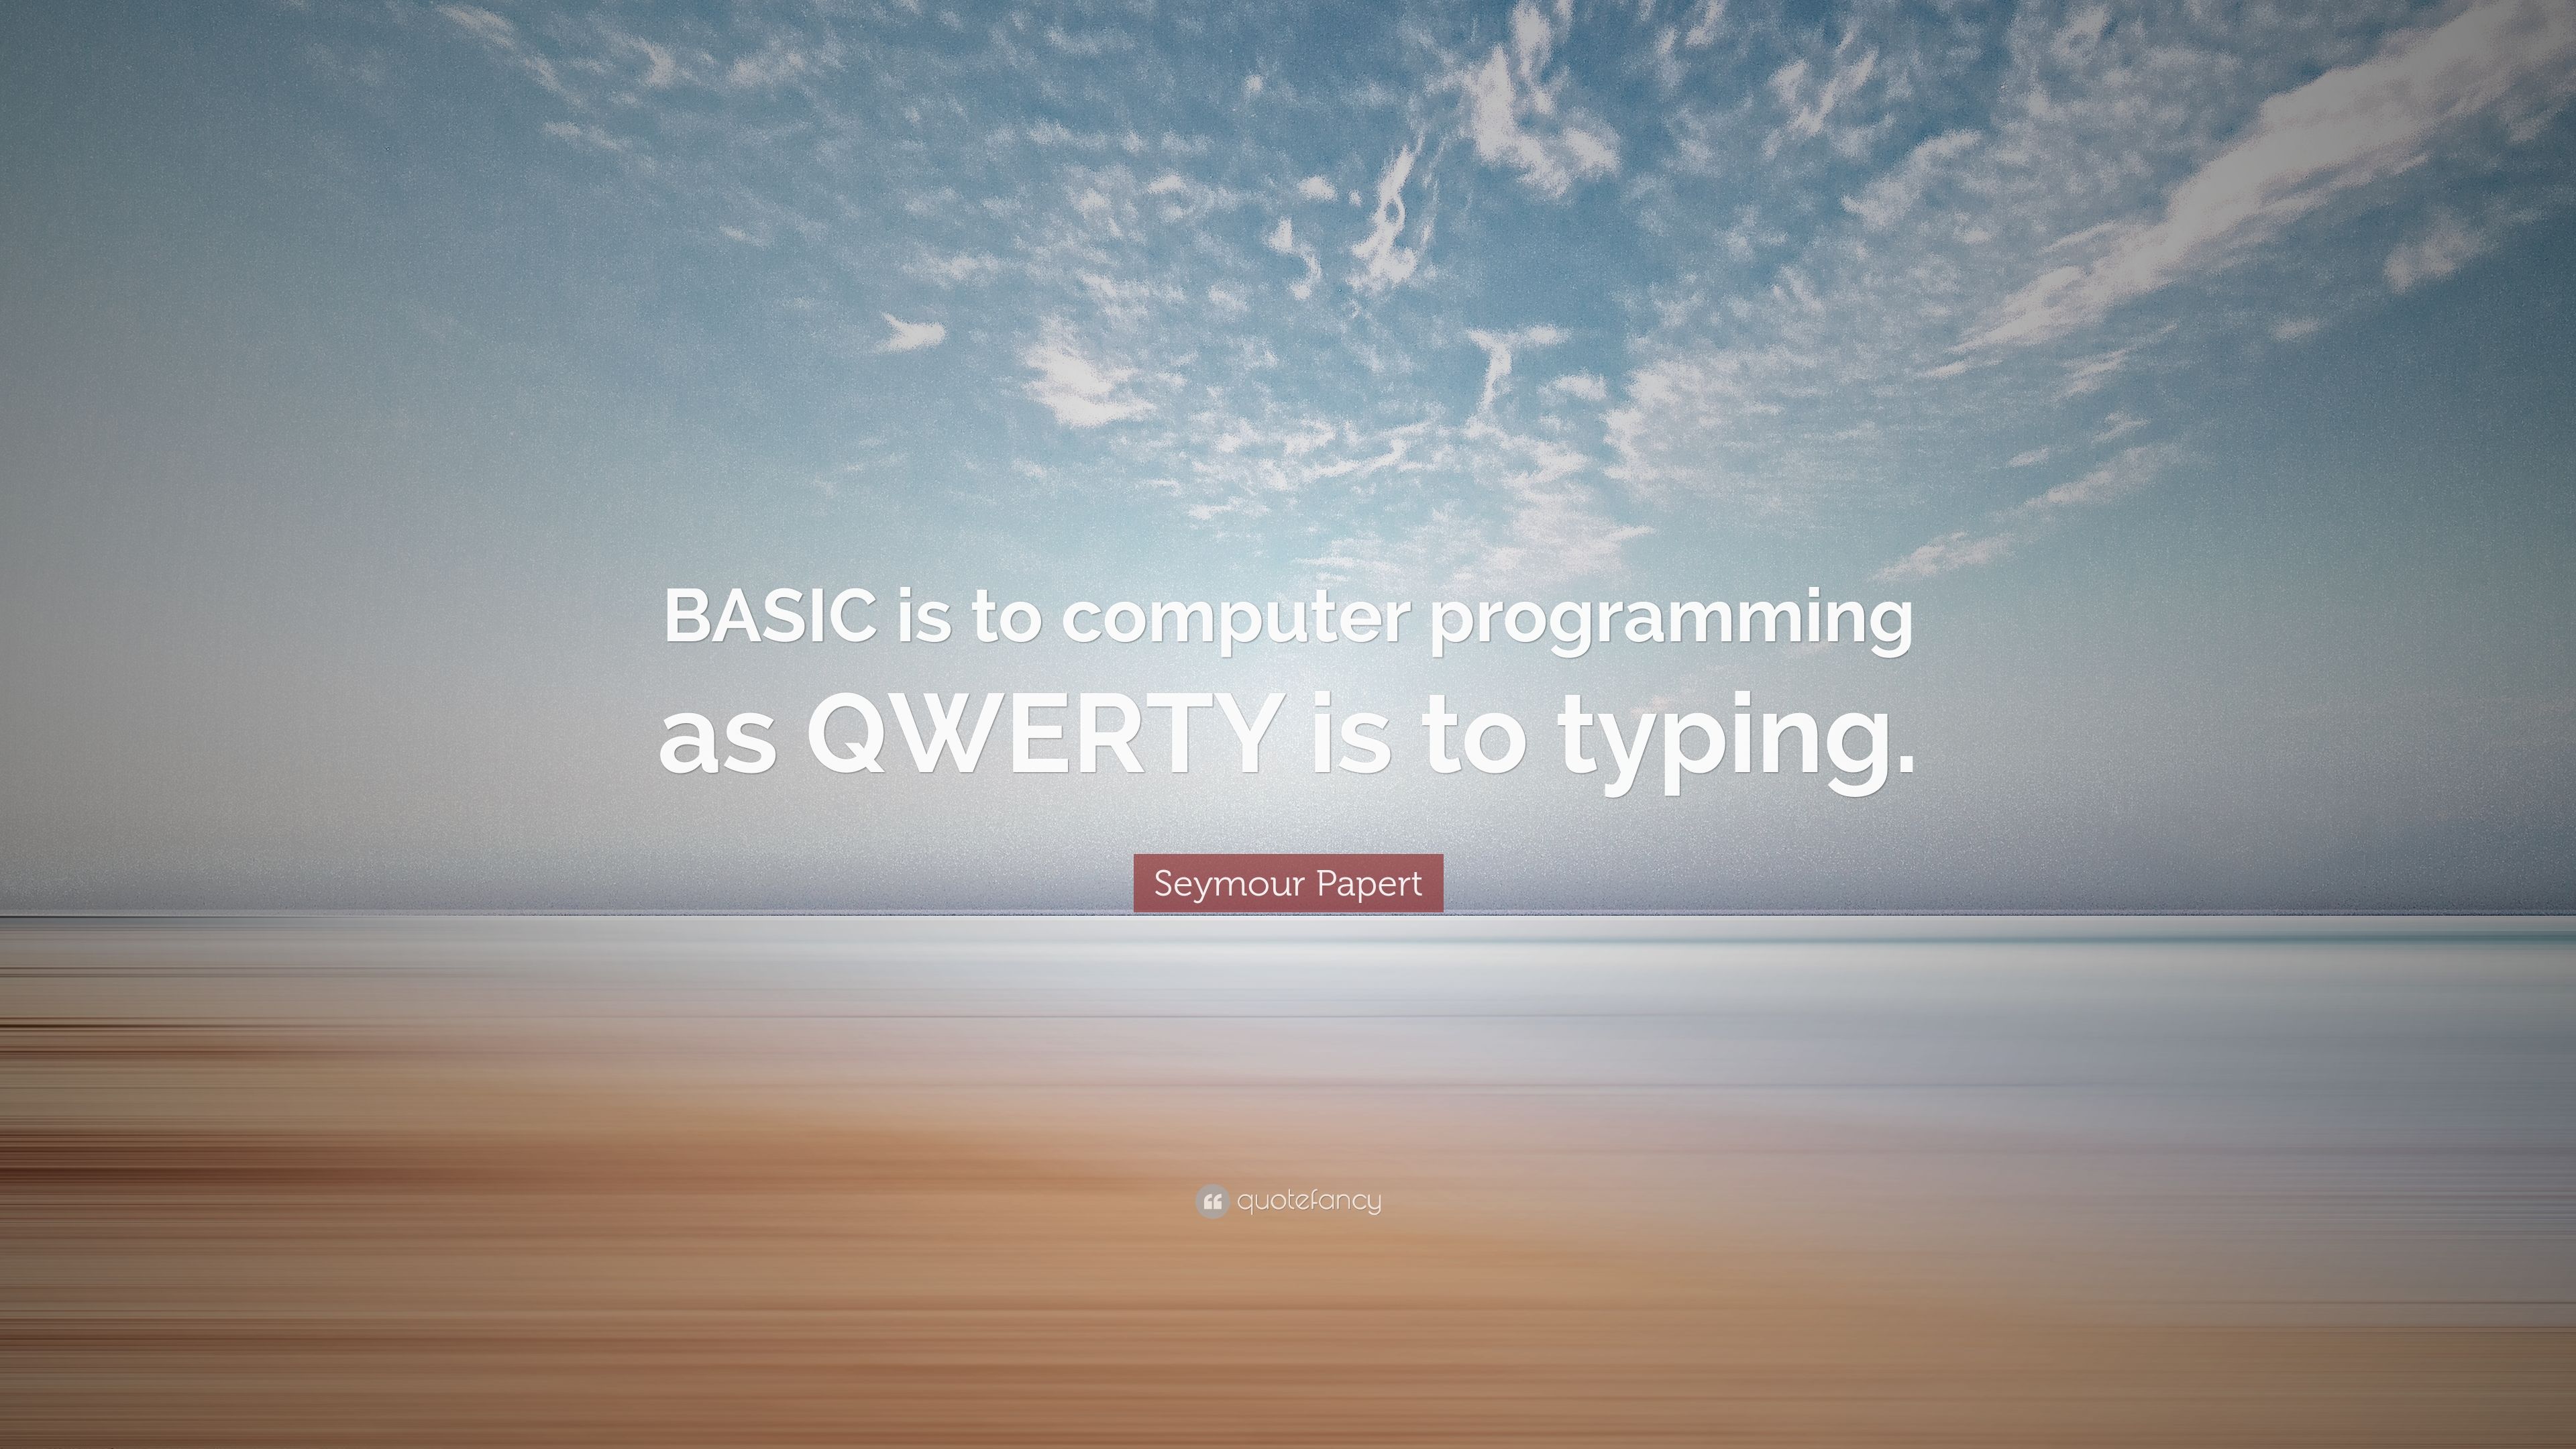 Seymour Papert Quote: “BASIC is to computer programming as QWERTY